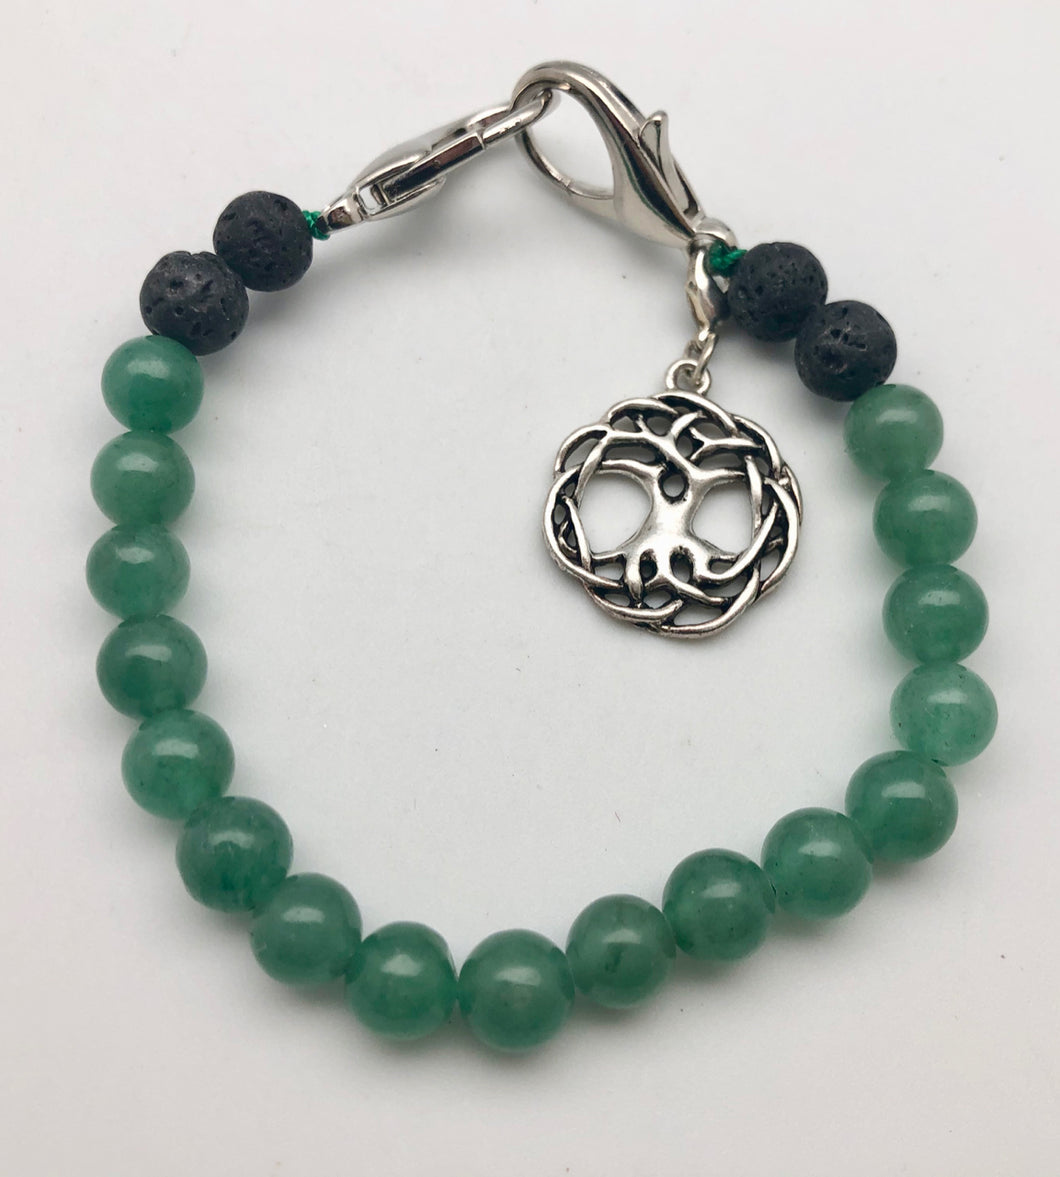 Strength and Stability Aventurine Bead Aromatherapy Key Keeper with Tree of Life Charm